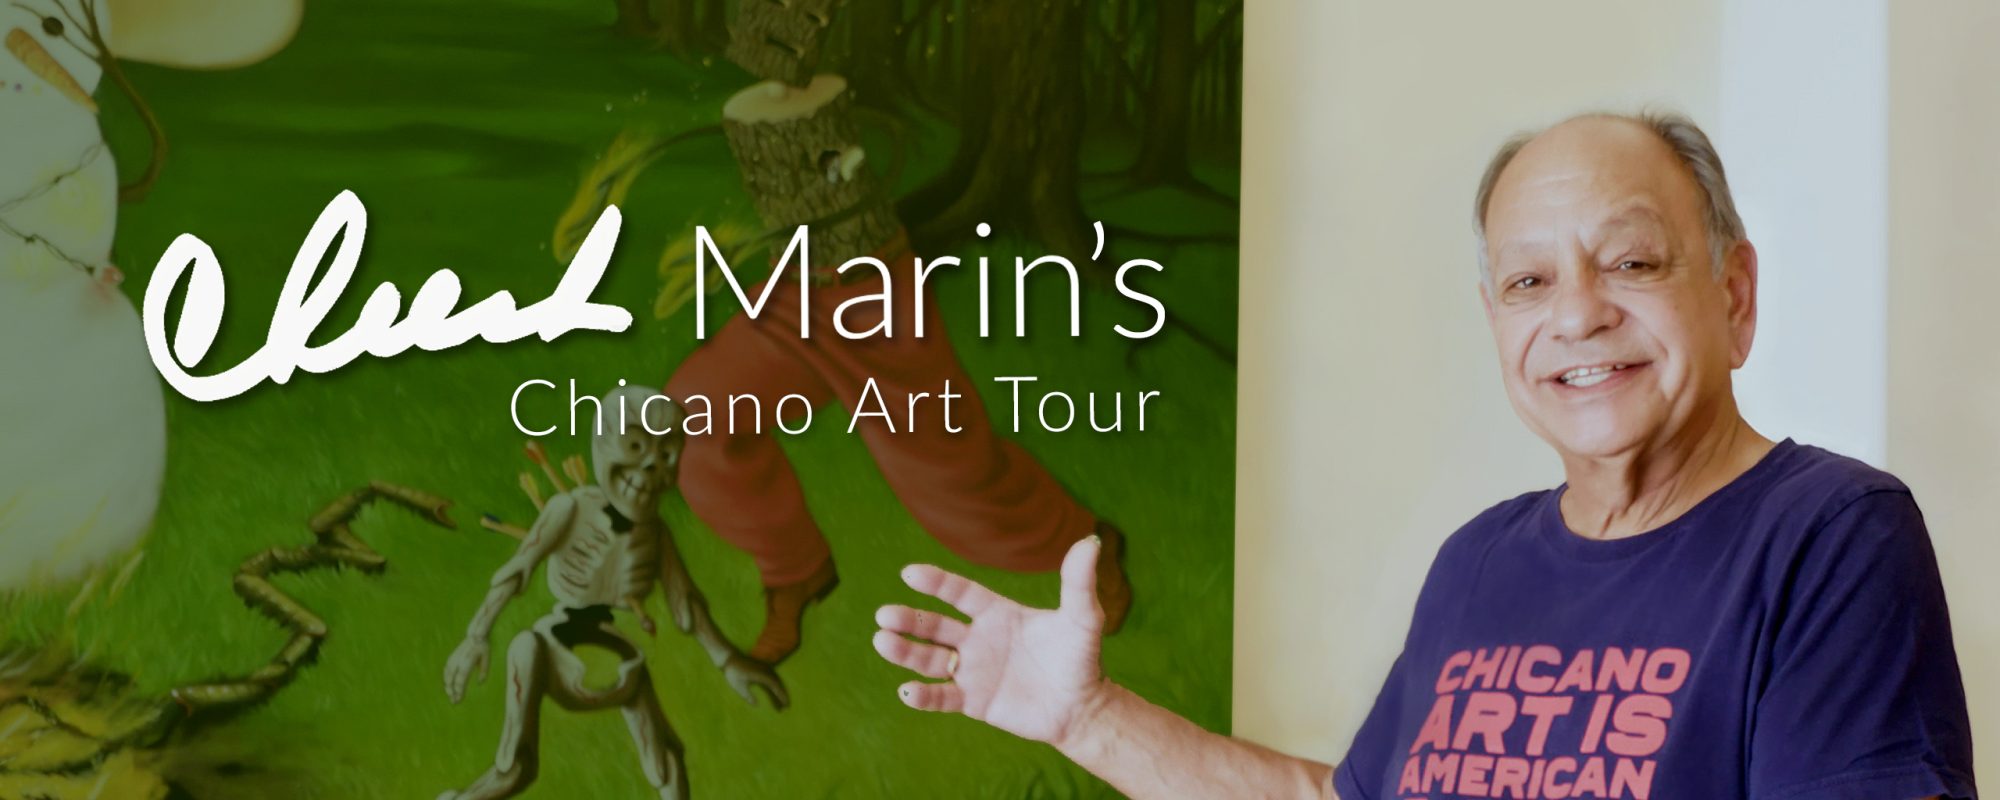 OVATION TV TO AIR WORLD TELEVISION PREMIERE OF CHEECH MARIN’S CHICANO ART TOUR DOCUMENTARY SPECIAL ON JUNE 15